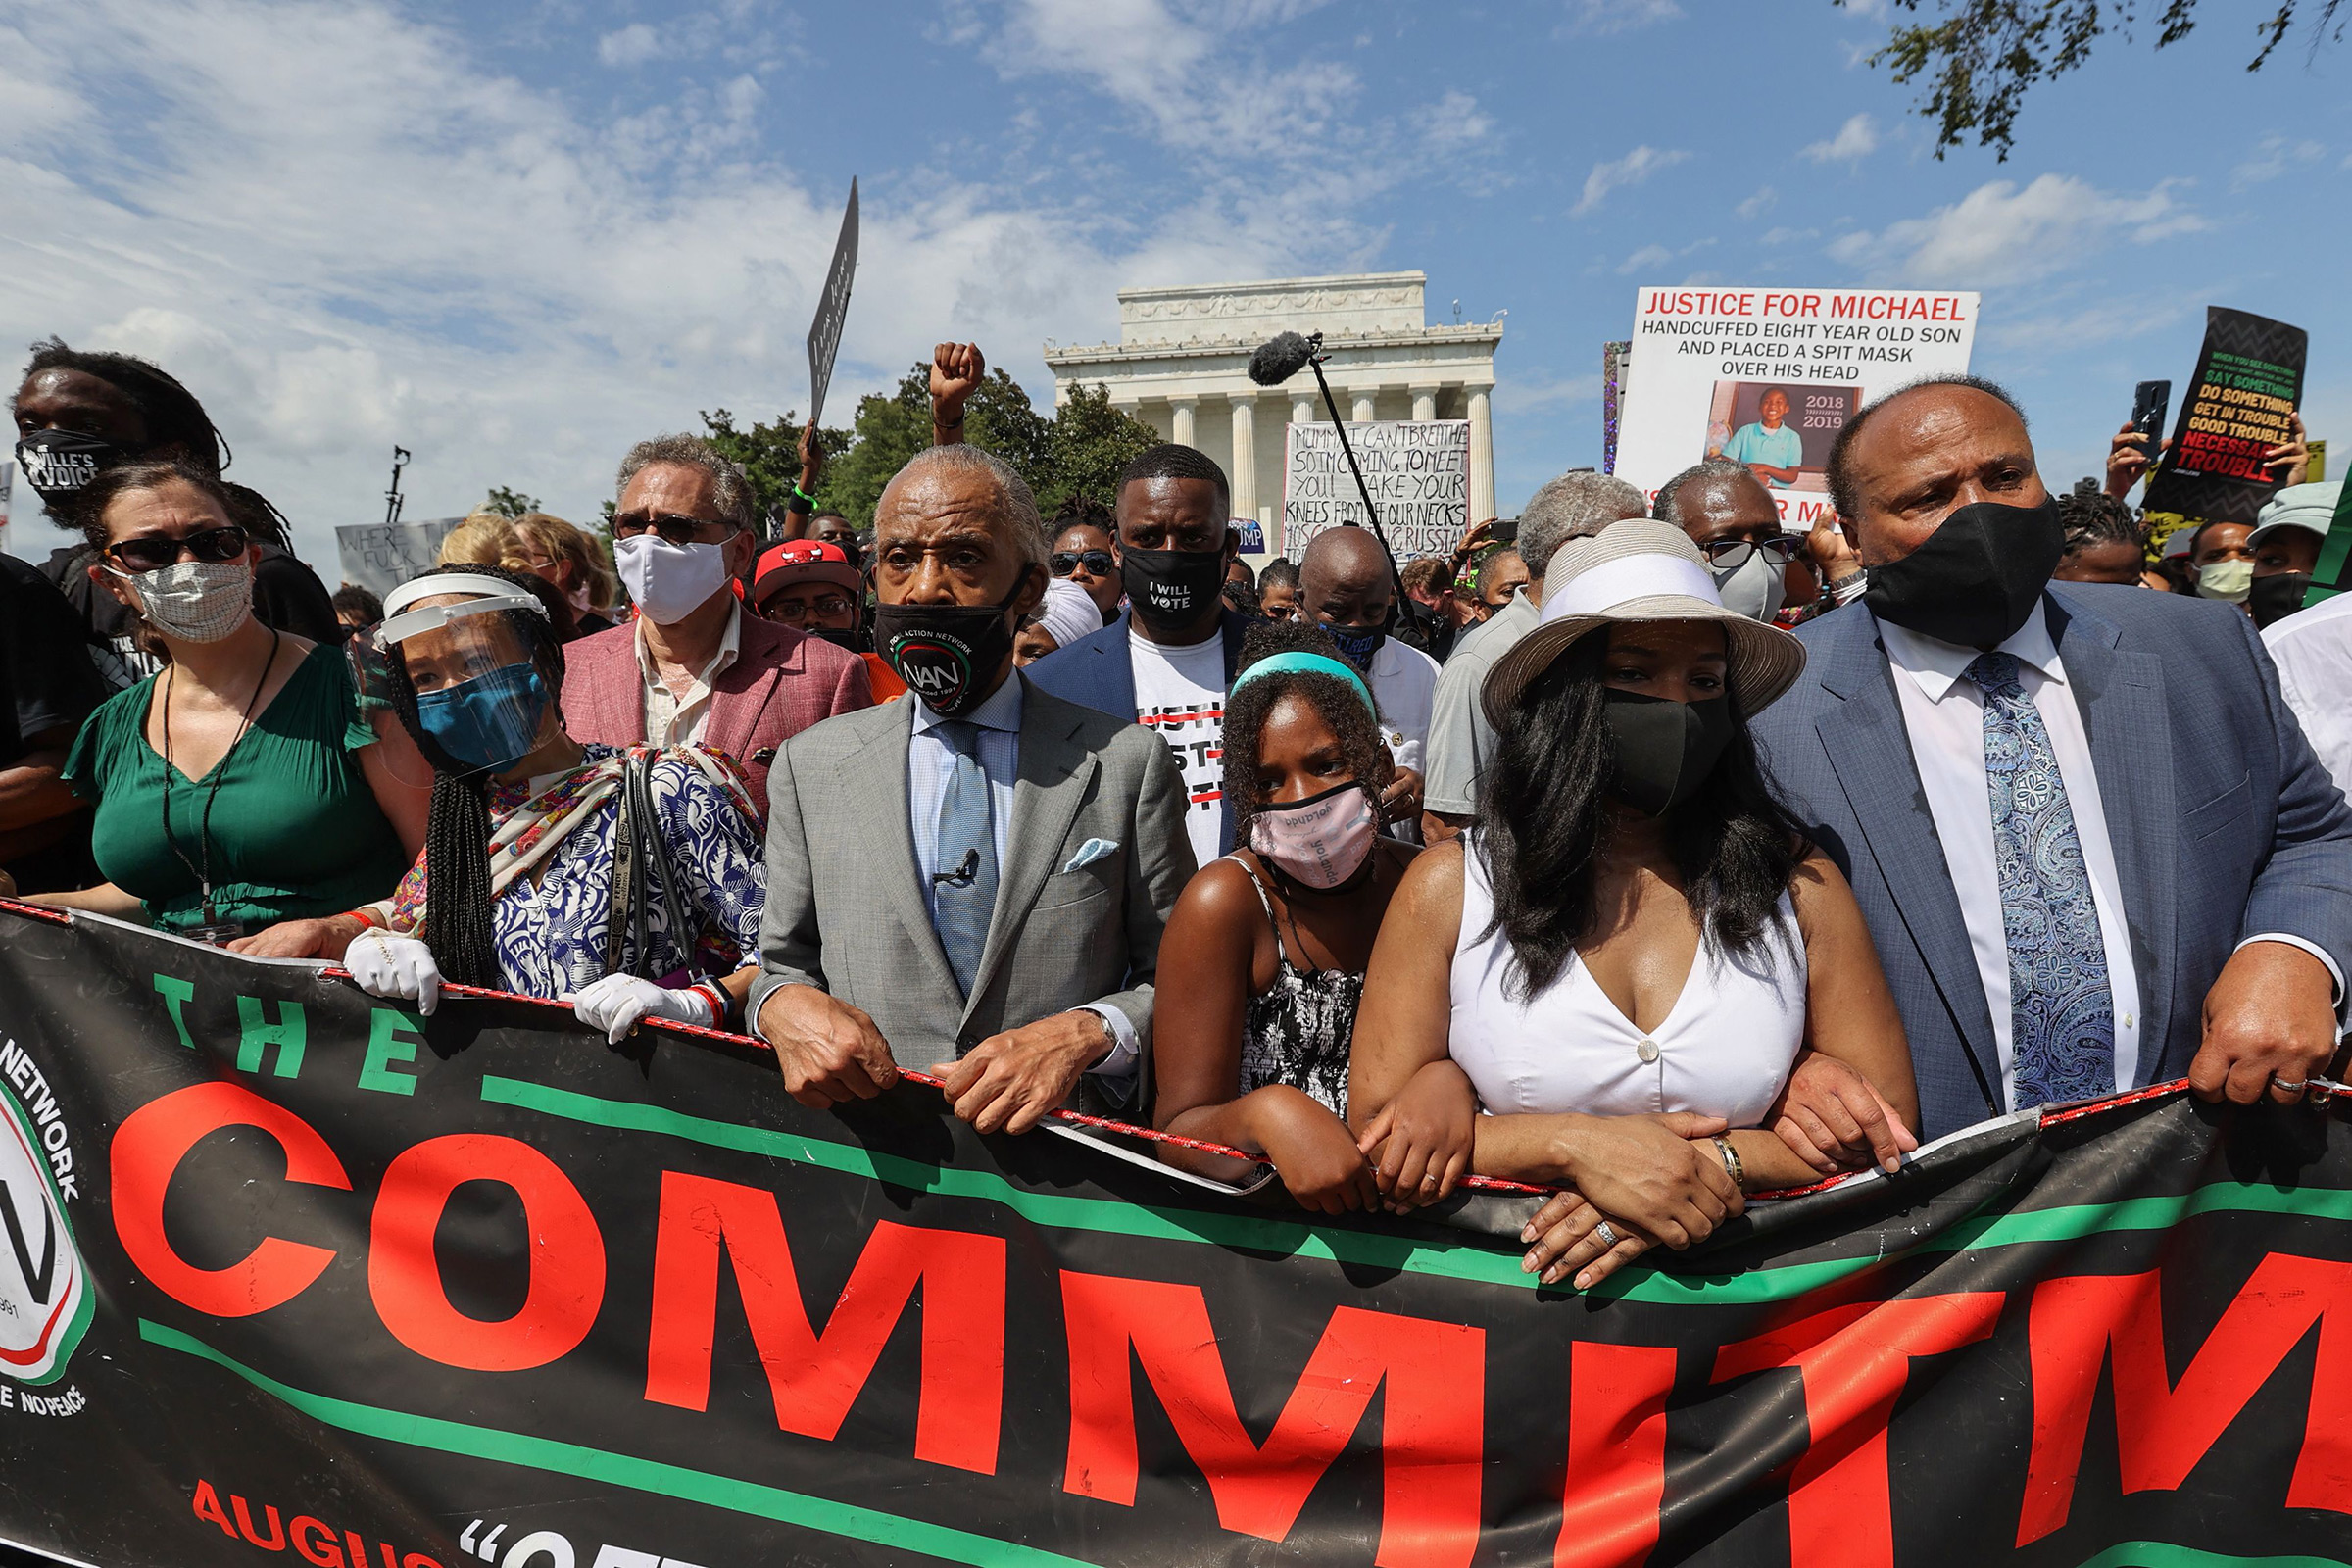 Rev. Al Sharpton, center, marches next to Yolanda King, Andrea Waters King and Martin Luther King, III during the "Commitment March: Get Your Knee Off Our Necks" protest against racism and police brutality, in Washington, D.C., on Aug. 28, 2020.